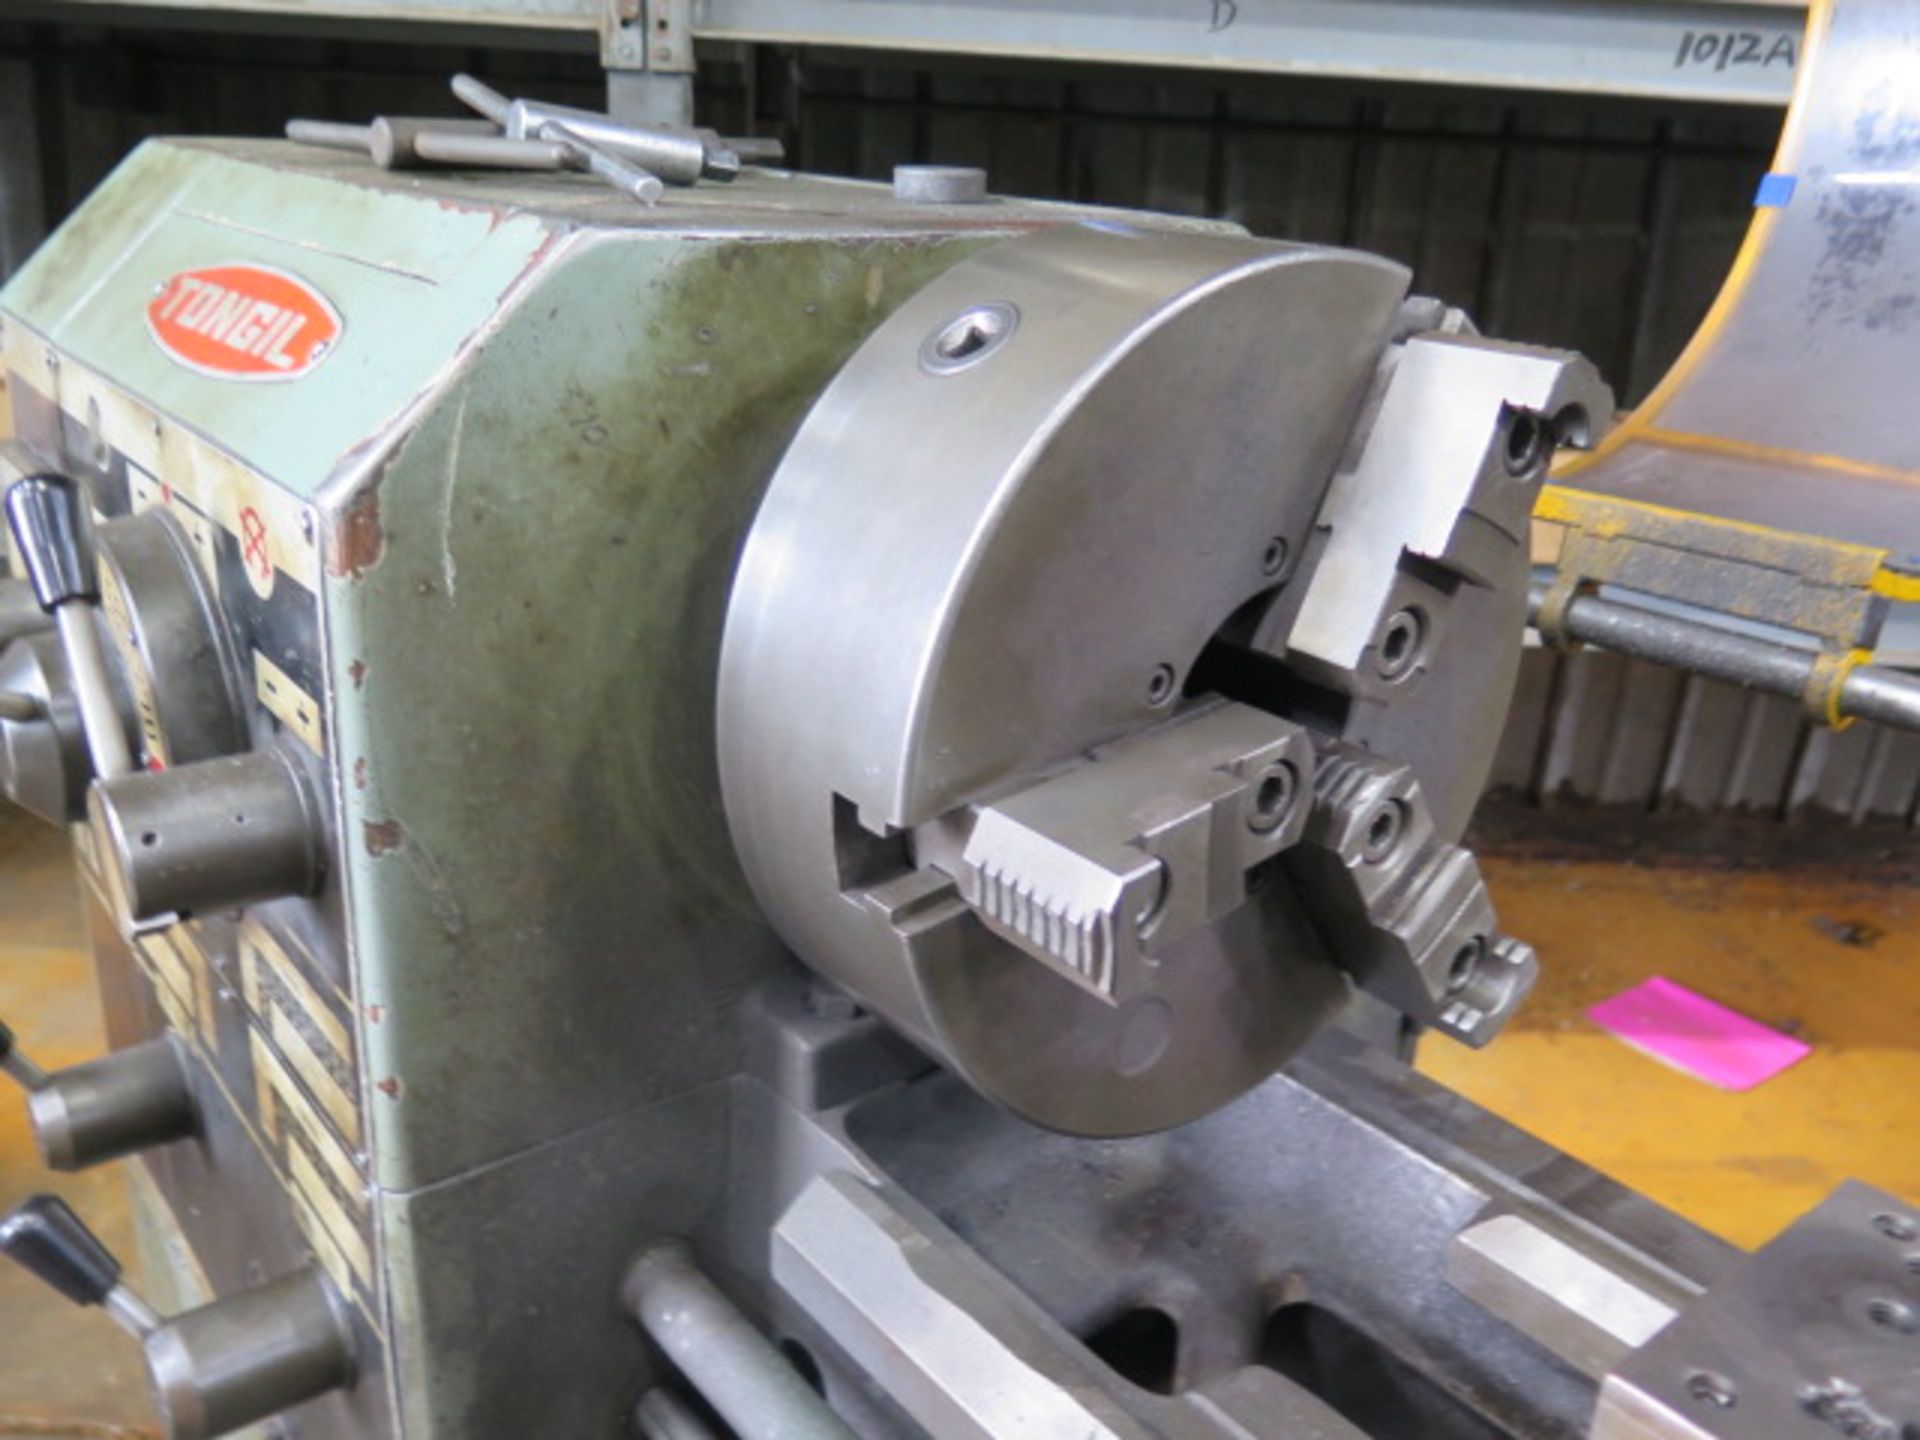 Tongil TIPL-4 15” x 42” Geared Head Gap Bed Lathe w/ 60-1500 RPM, Inch/mm Threading, SOLD AS IS - Image 7 of 12